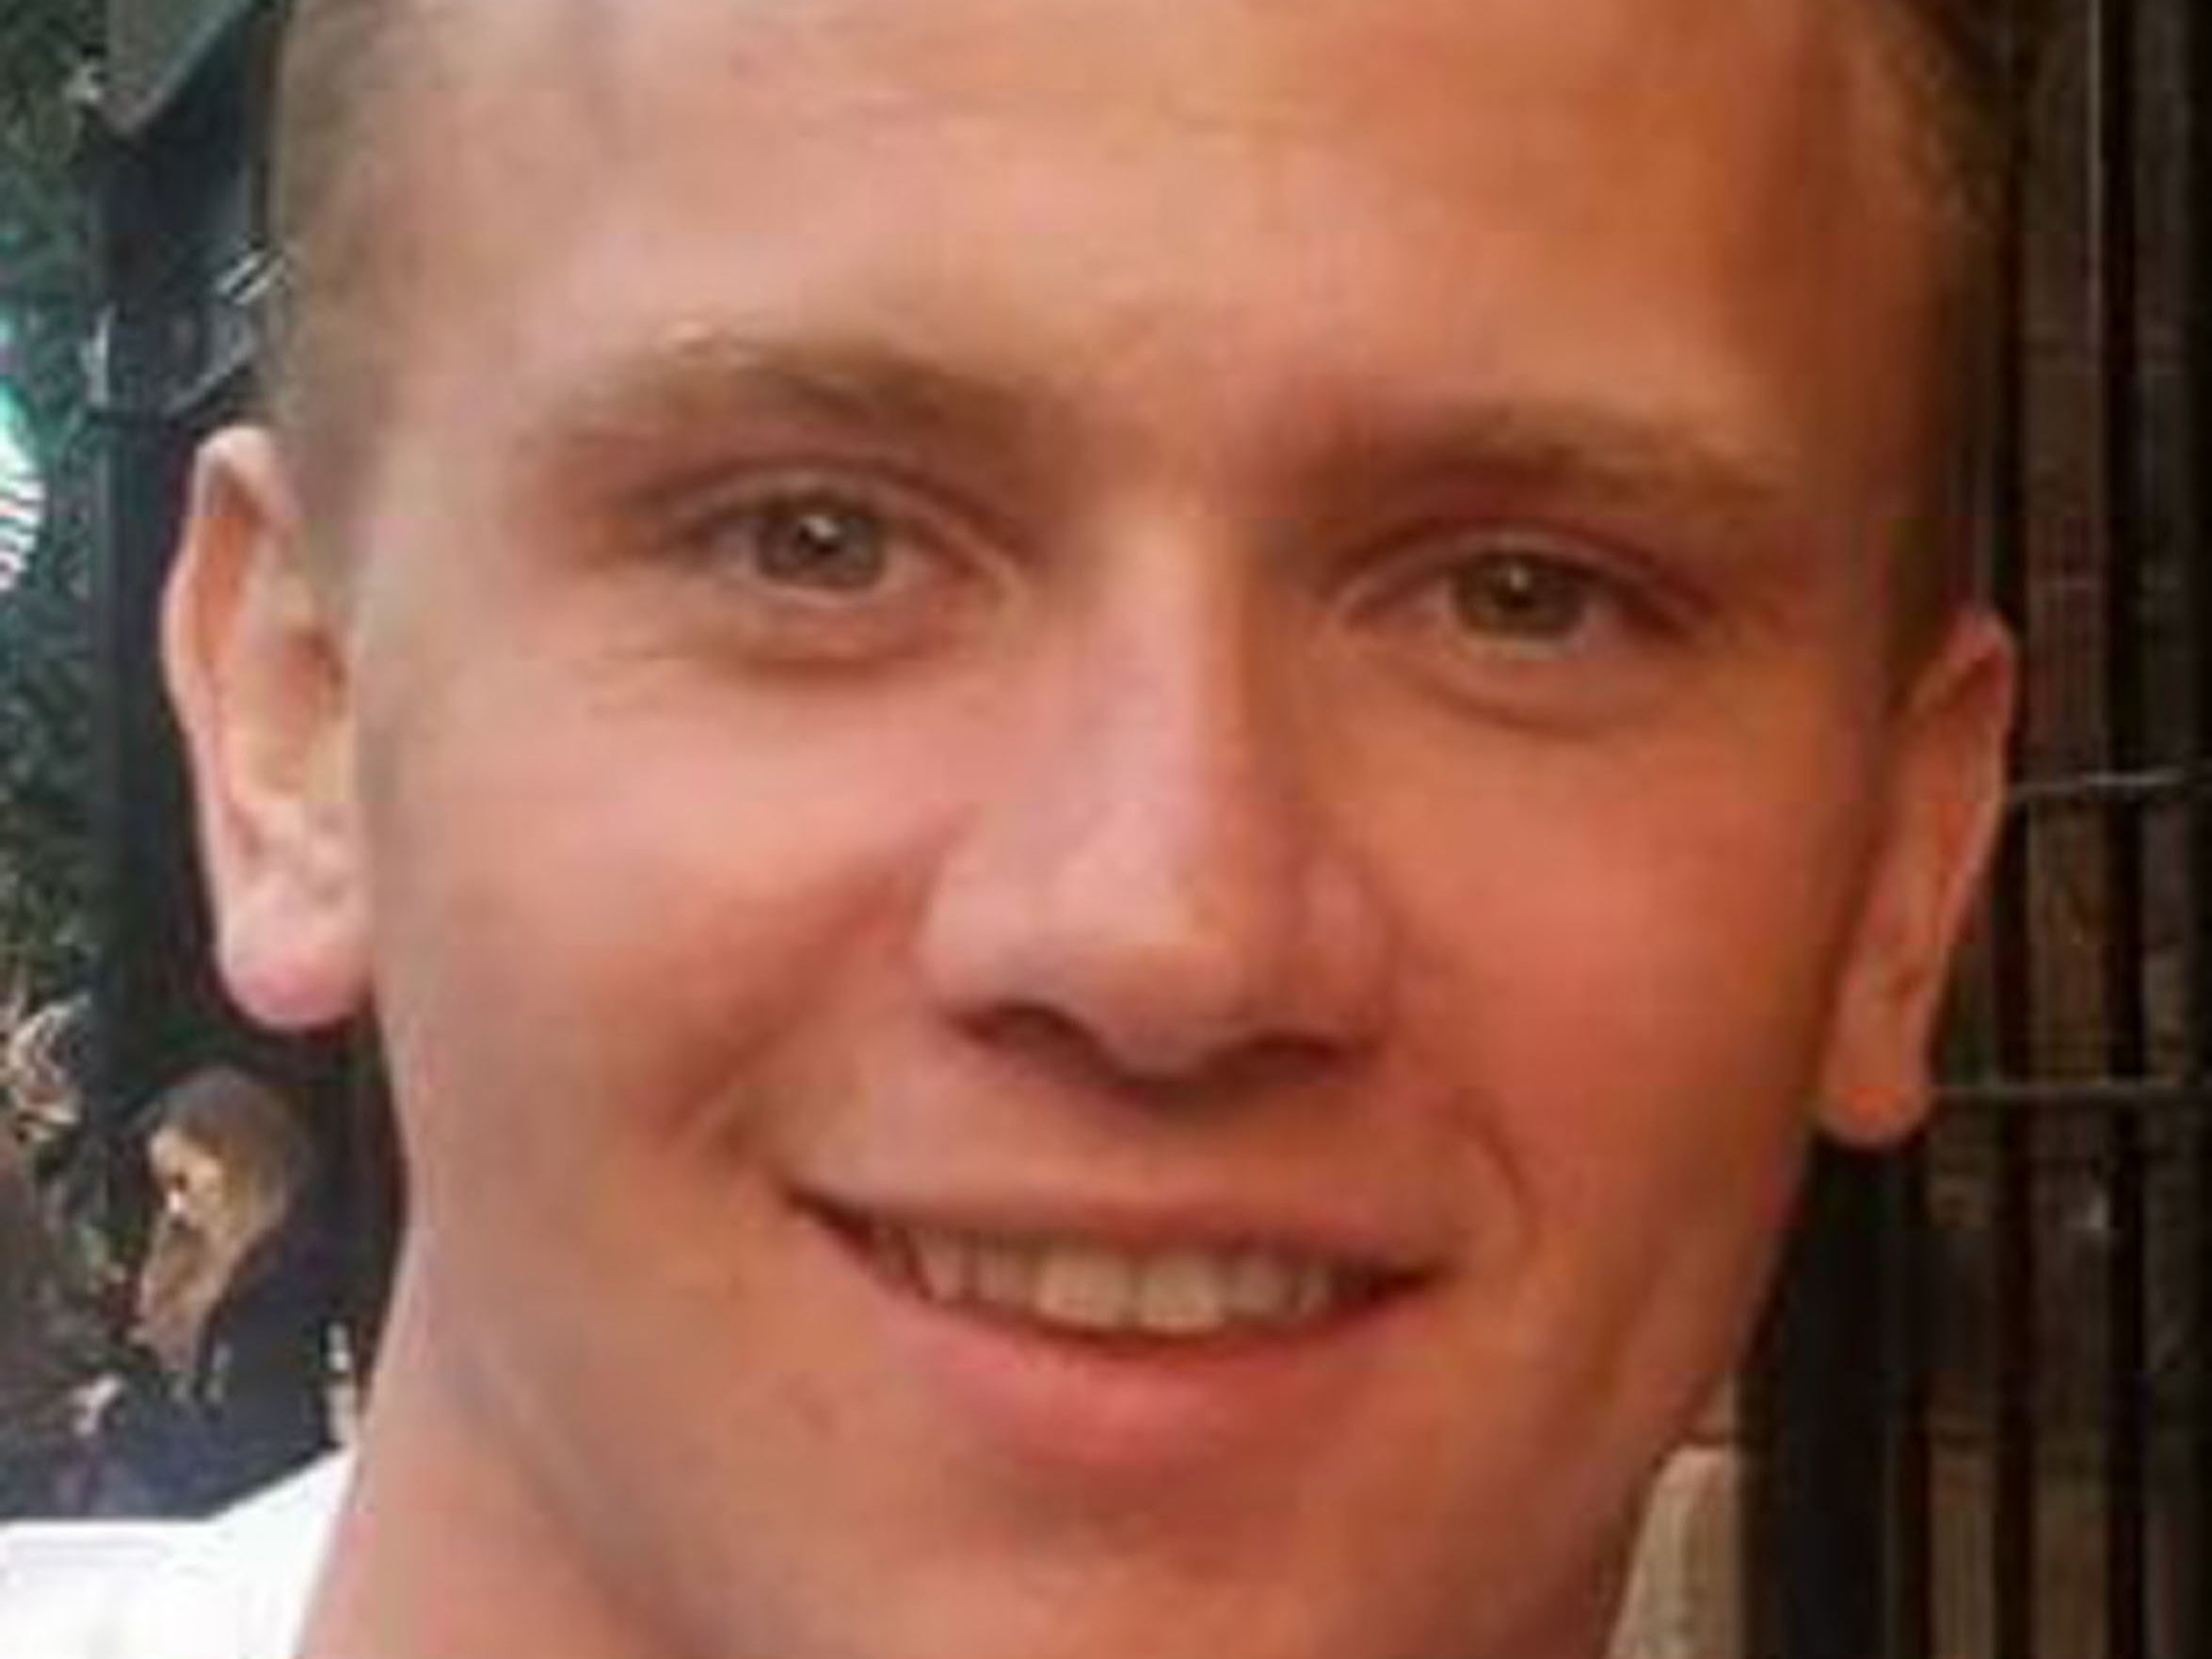 An inquest into the death of RAF gunner Corrie McKeague who vanished after a night out in 2016 is due to be heard by a jury